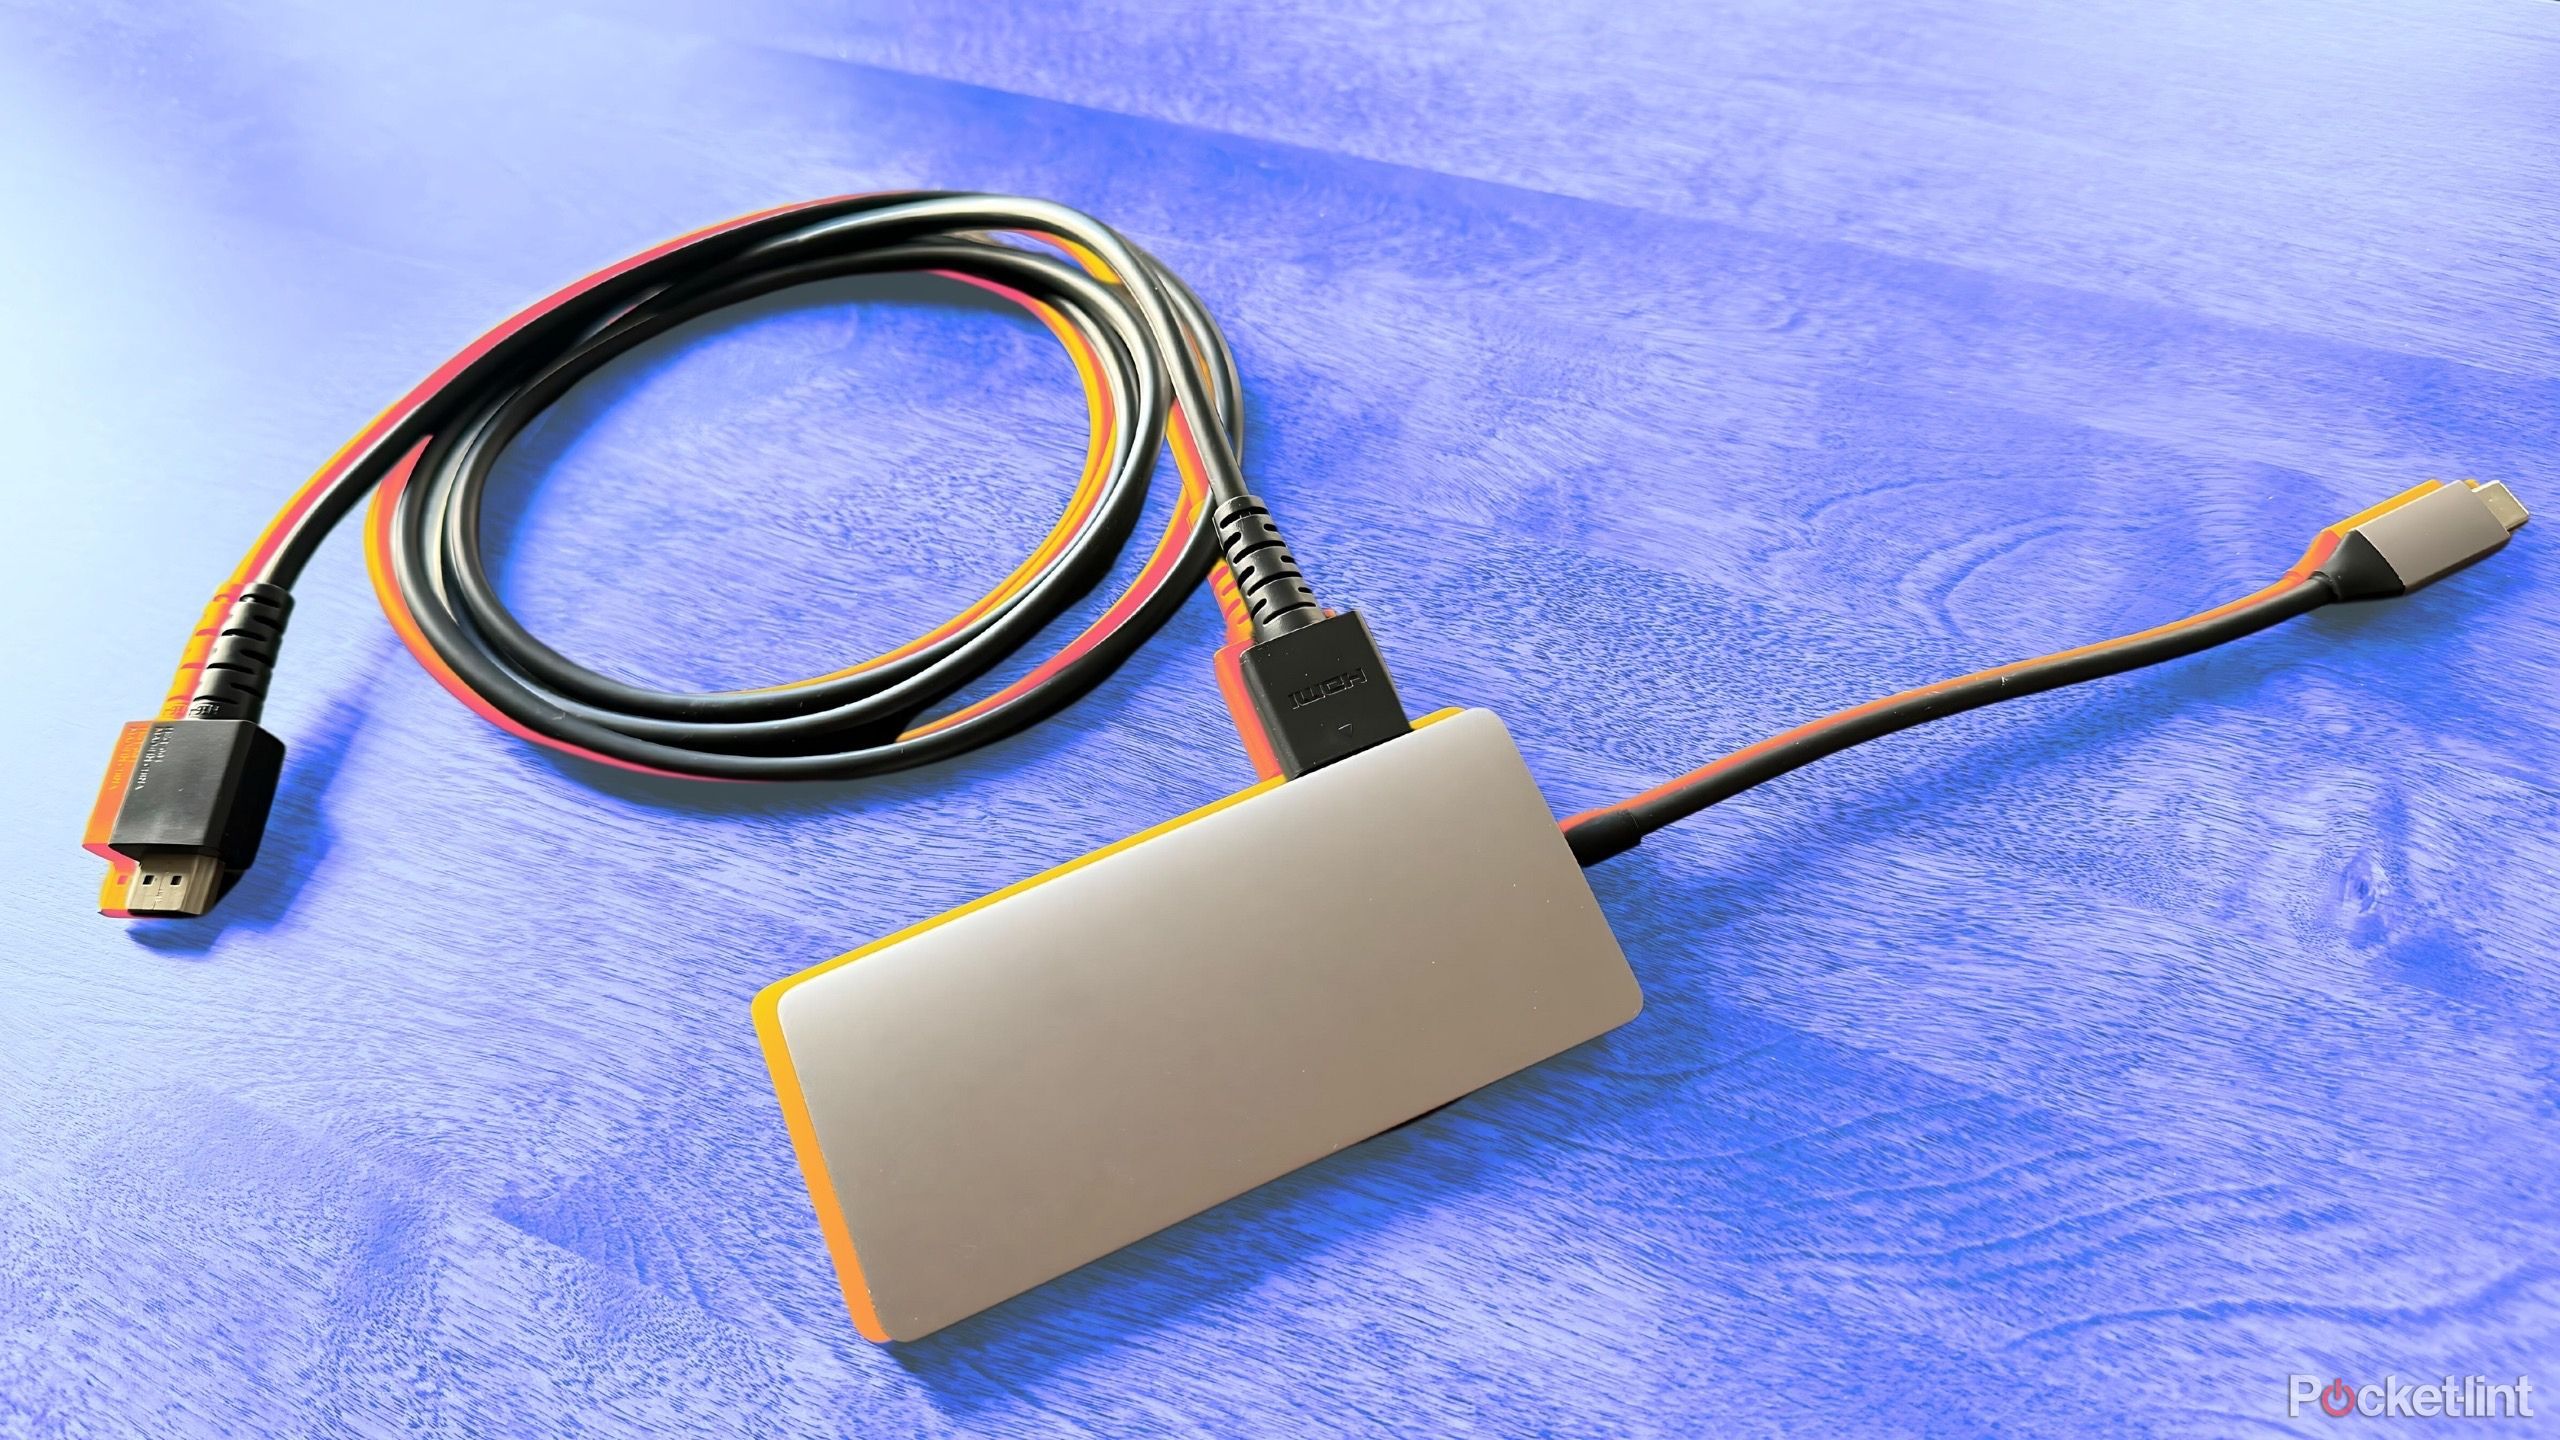 Satechi USB-C Hub and HDMI cable